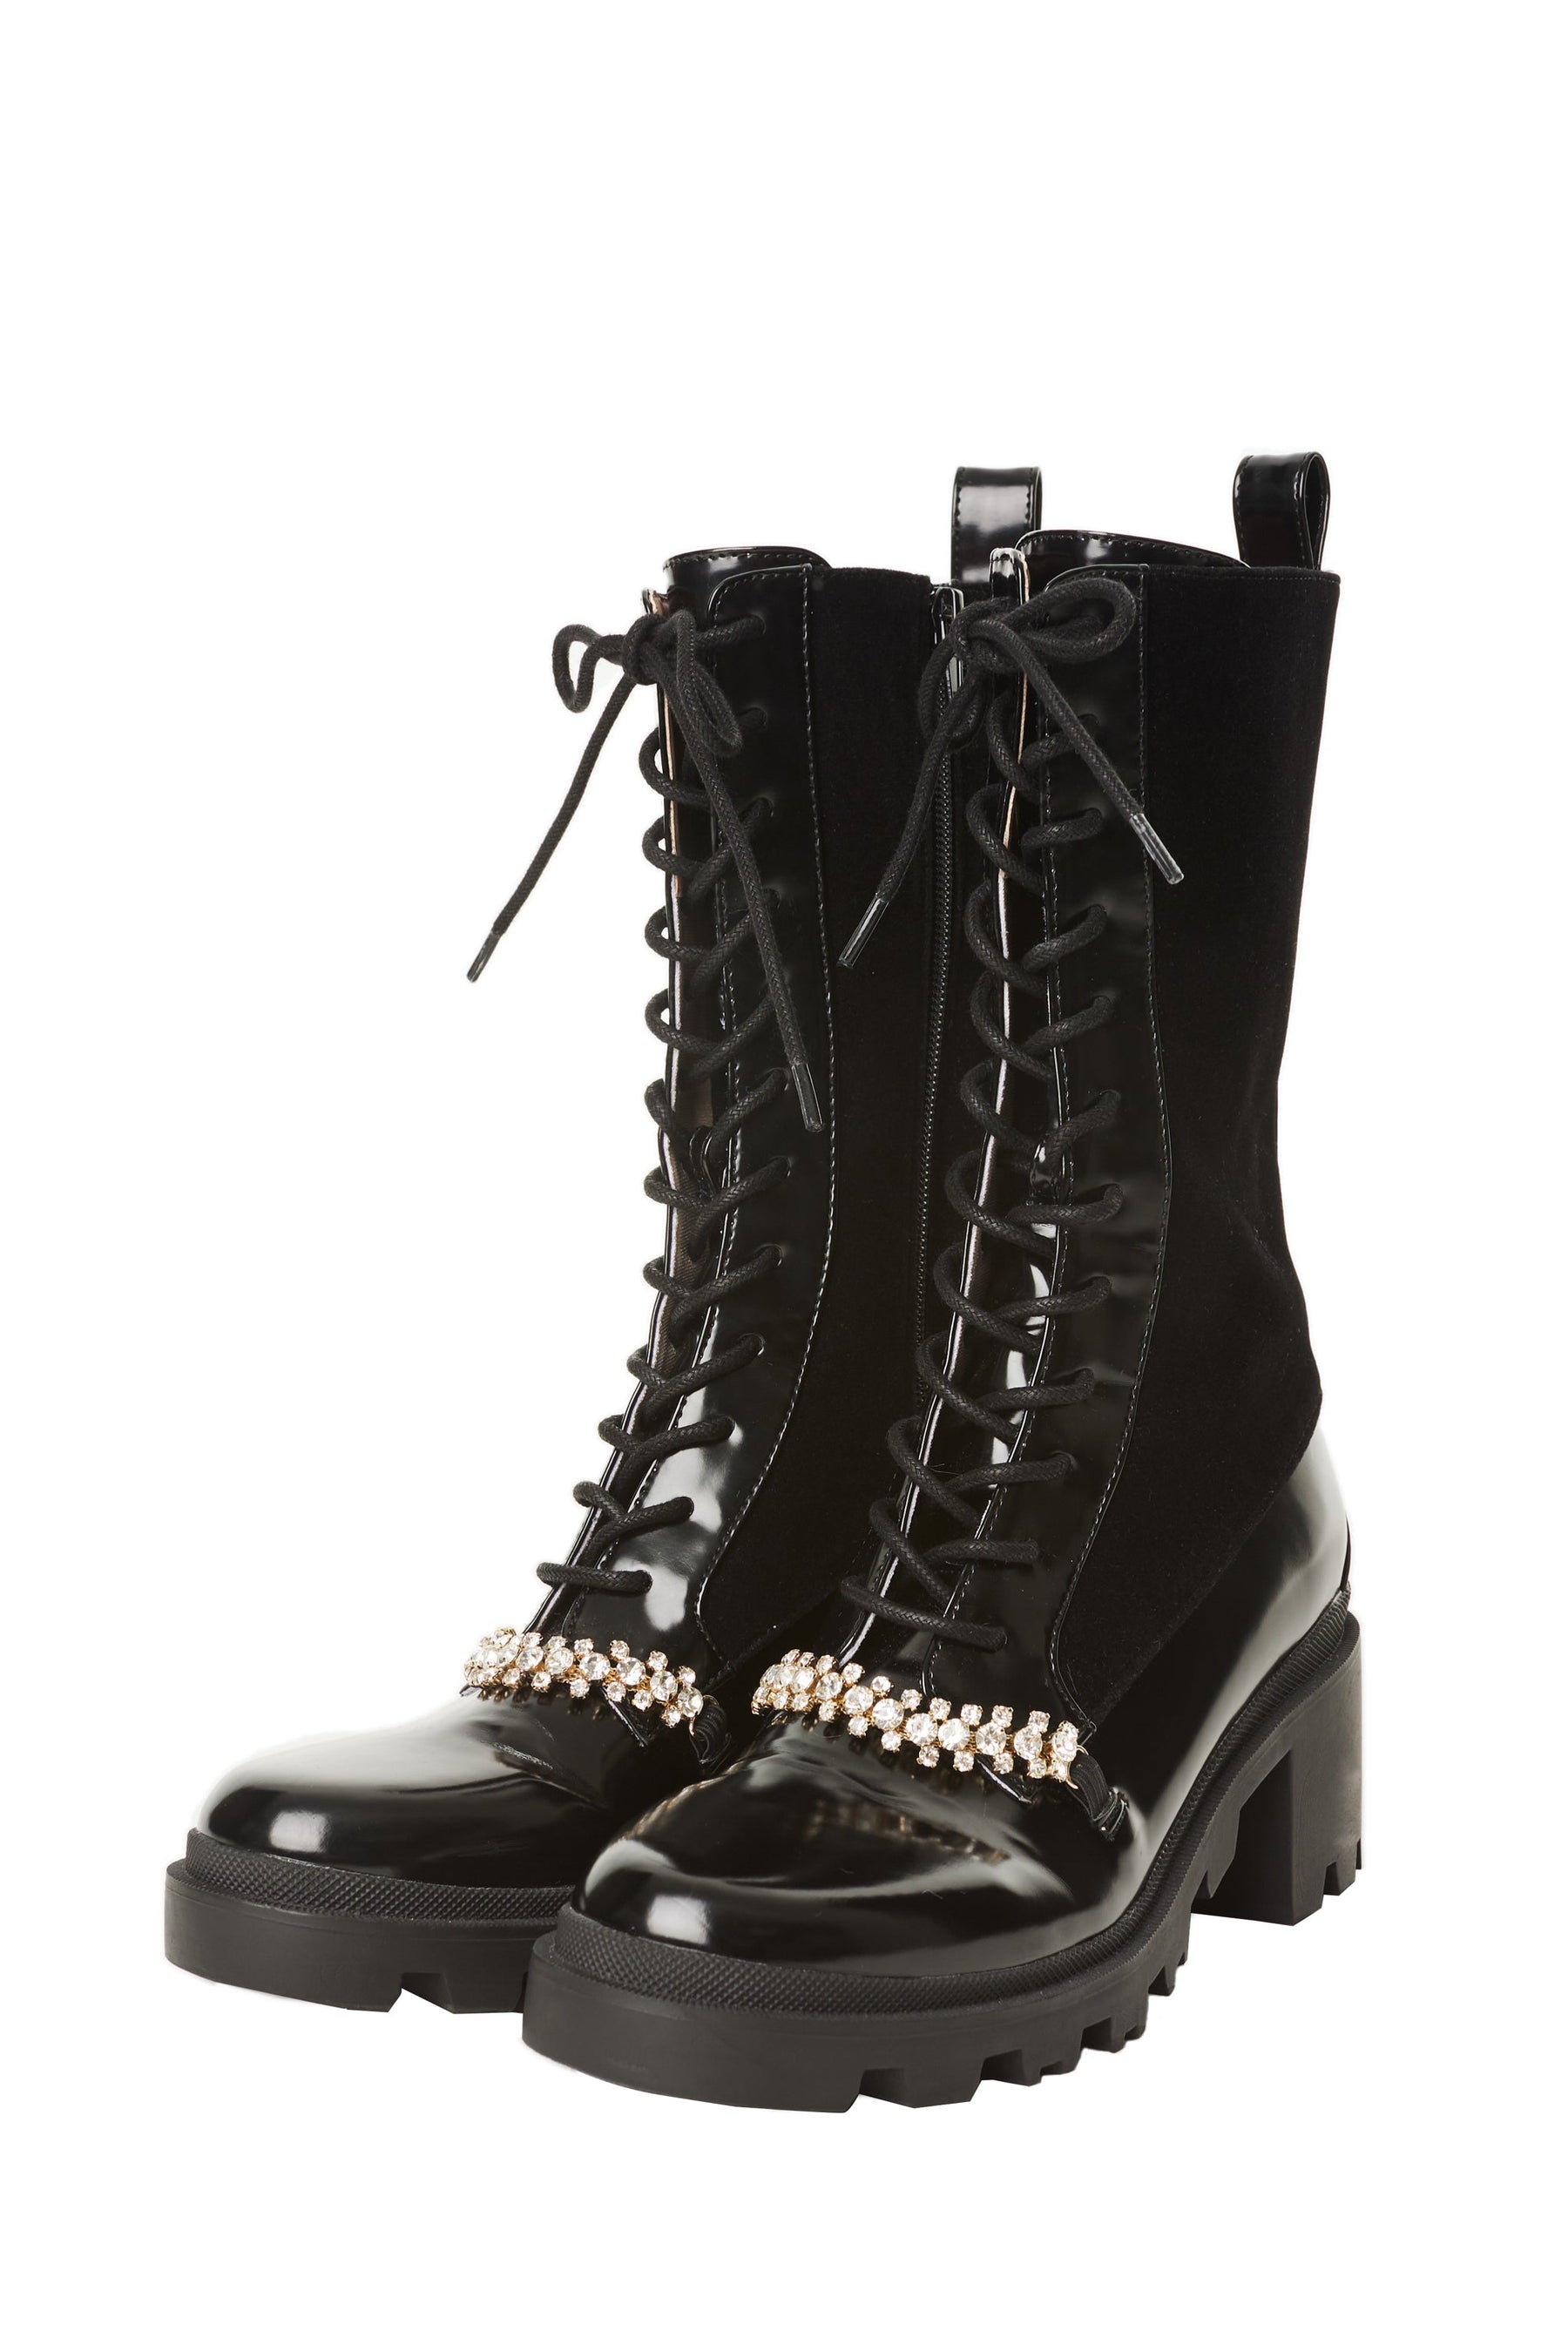 herlipto Crystal Lace-Up Ankle Boots 36-